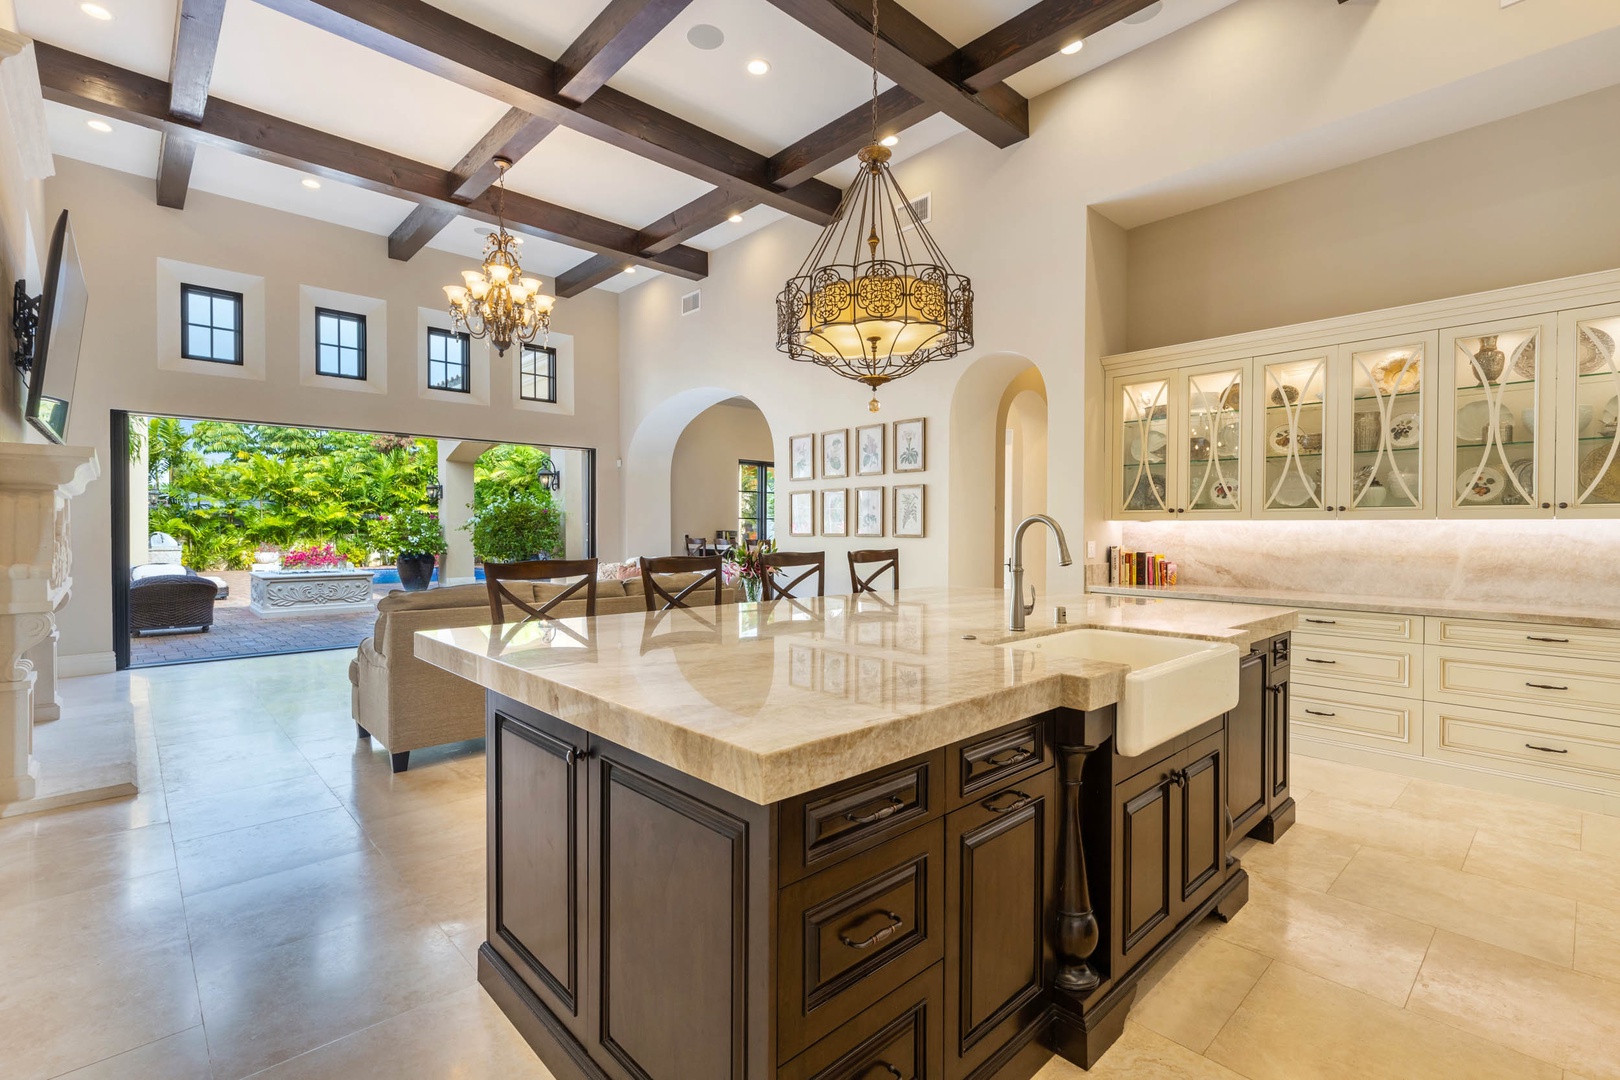 Honolulu Vacation Rentals, Royal Kahala Estate - The open floorplan connects lania, living, kitchen and dining for indoor-outdoor living.